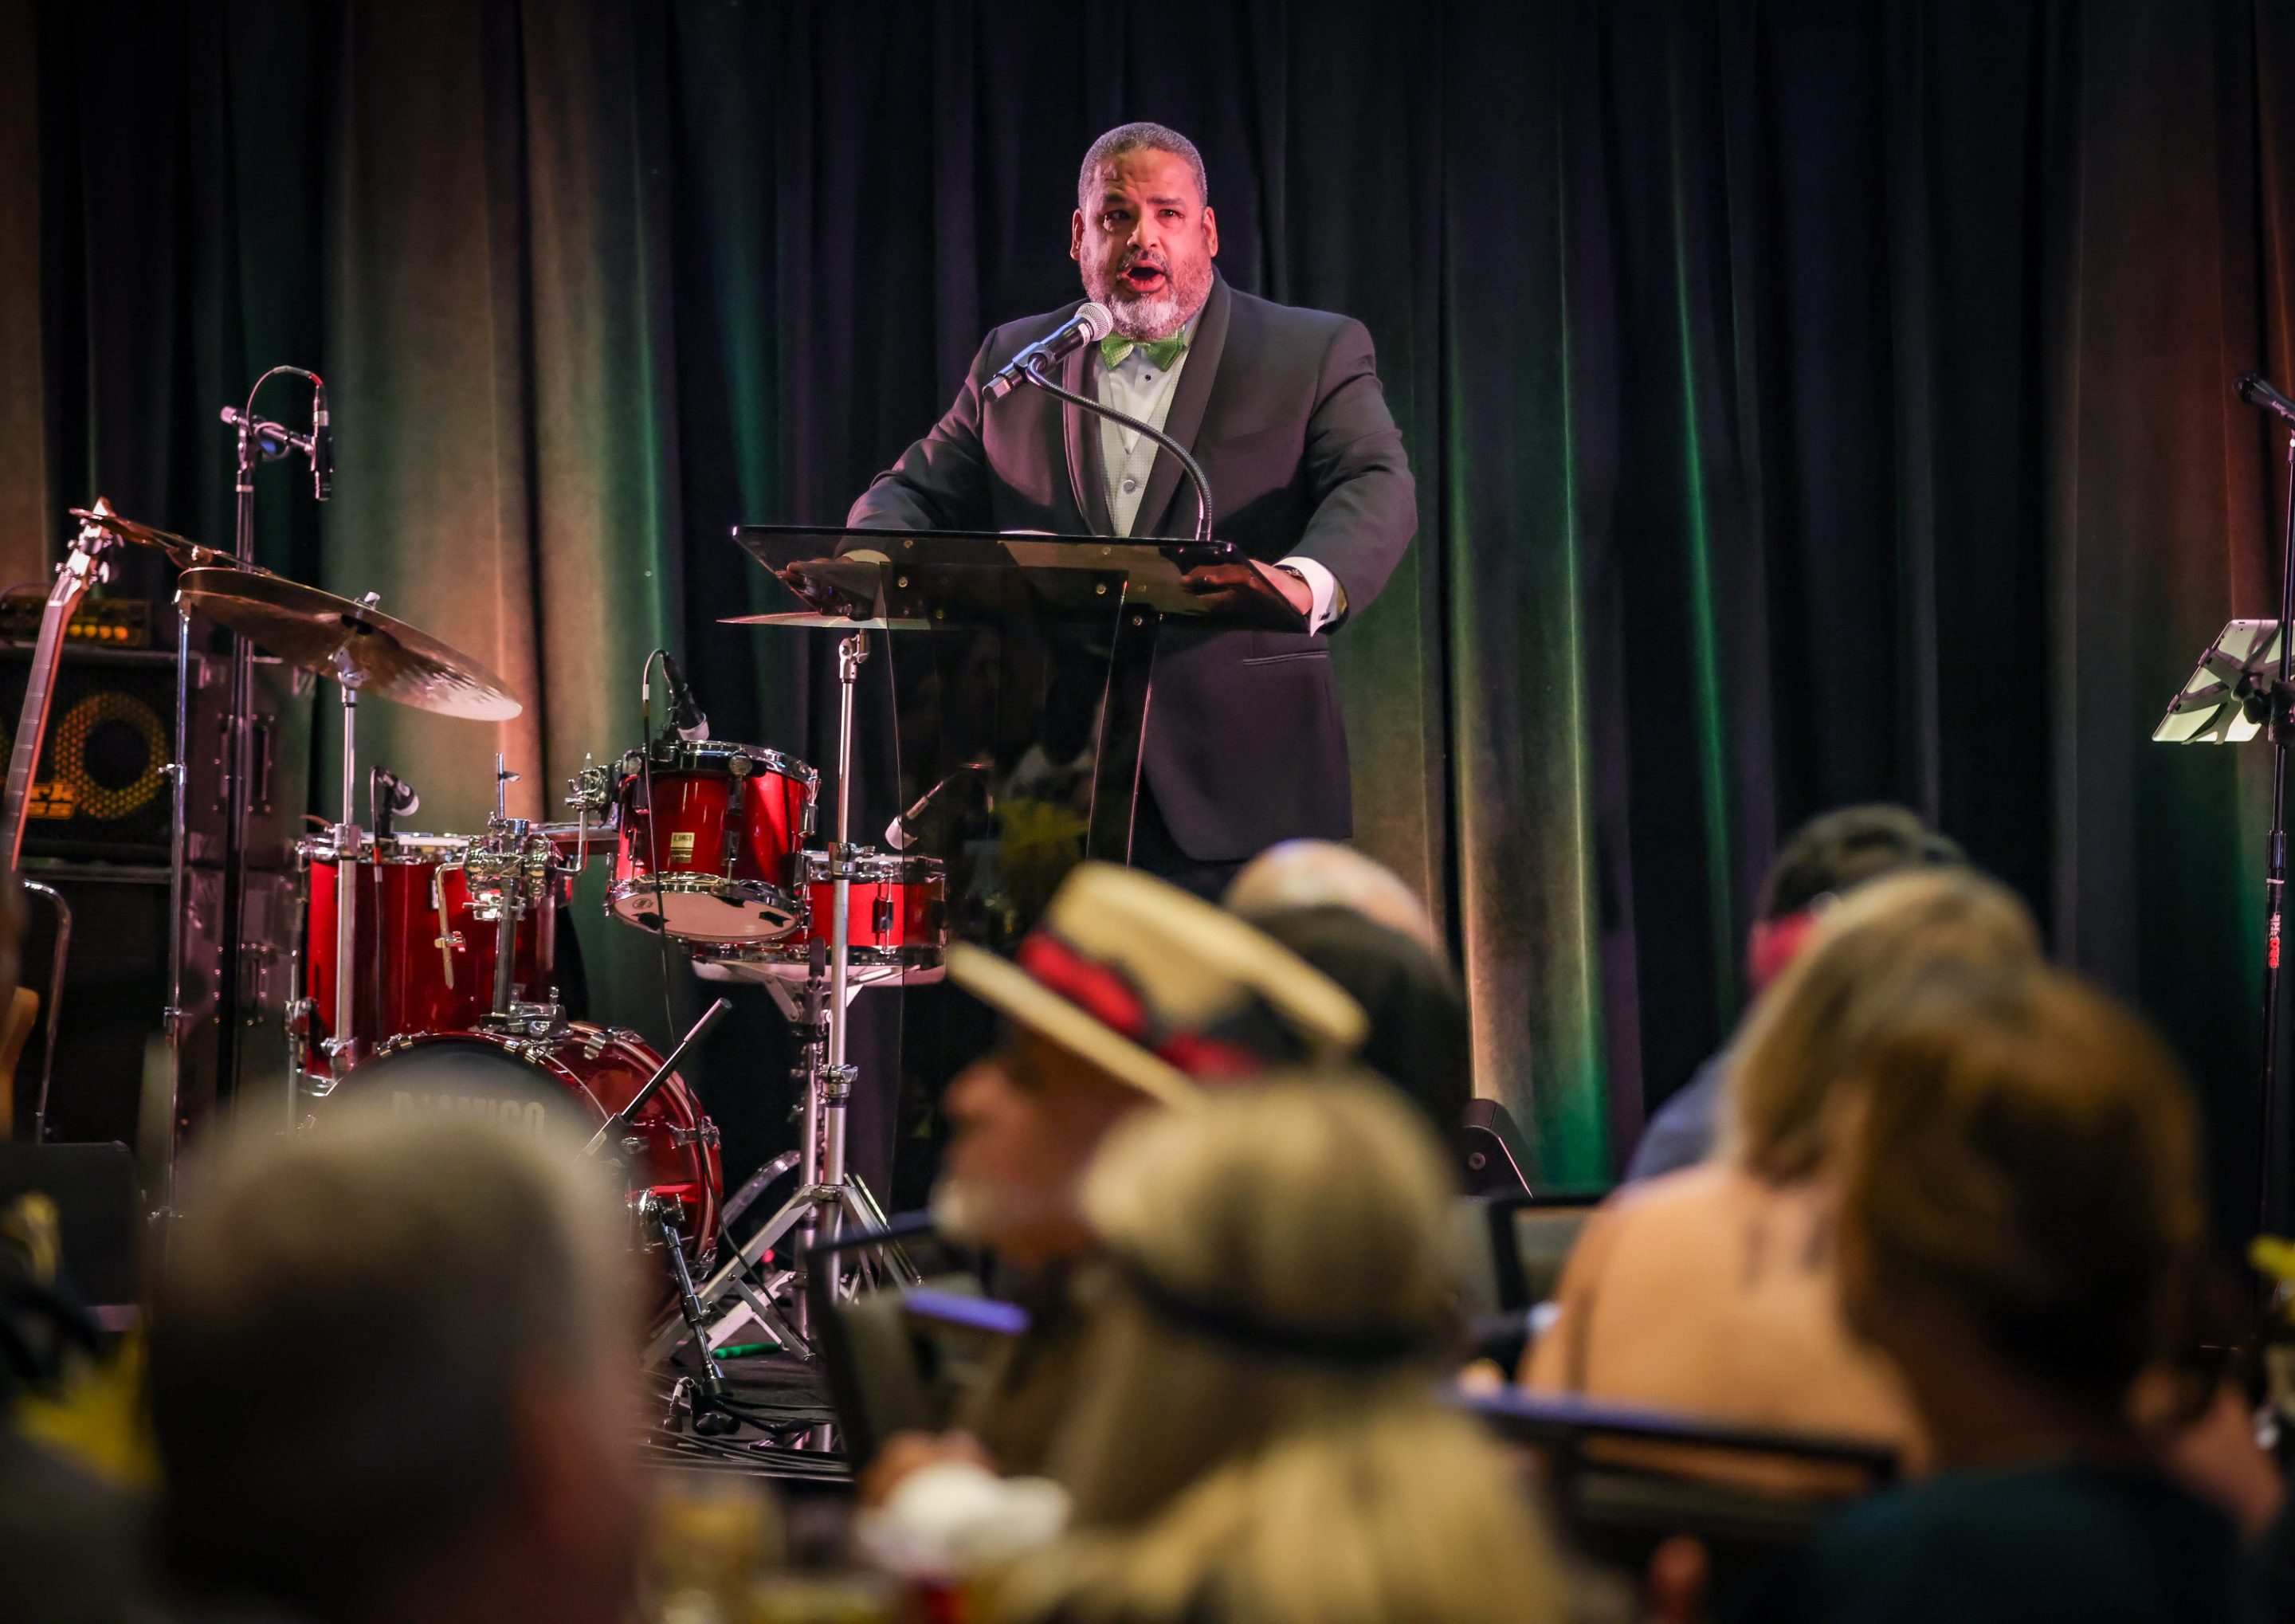 A man in a tuxedo giving a speech at The LIME Foundation event.